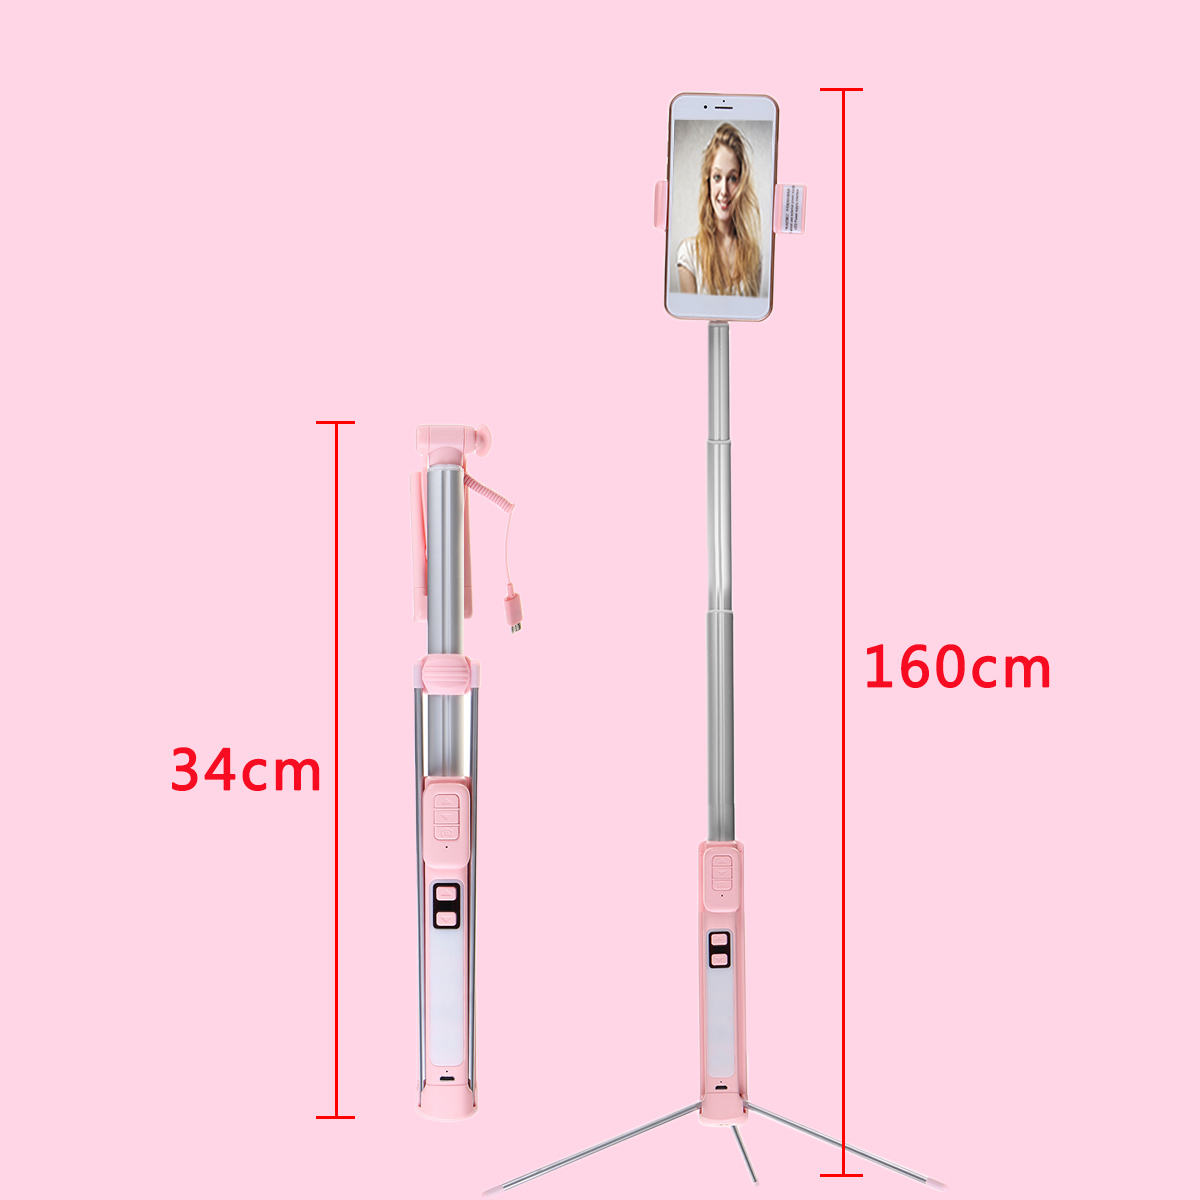 Mini-bluetooth-Hand-held-Selfie-Stick-Remote-Control-Multi-angle-Tripod-With-LED-Fill-Light-for-Live-1538122-6